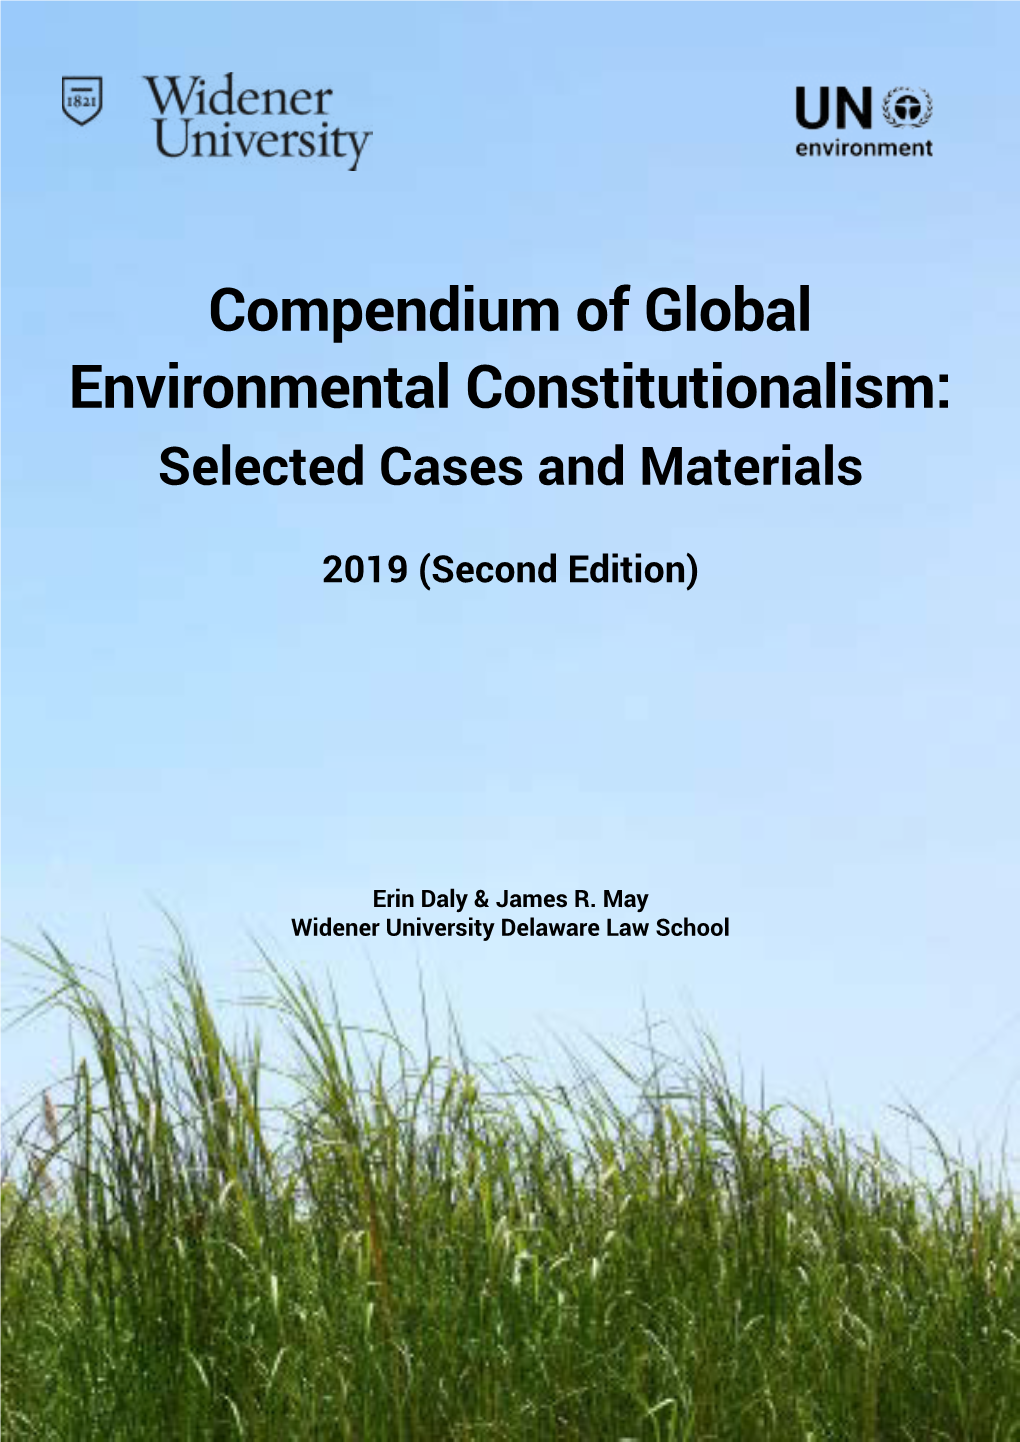 Compendium of Global Environmental Constitutionalism: Selected Cases and Materials